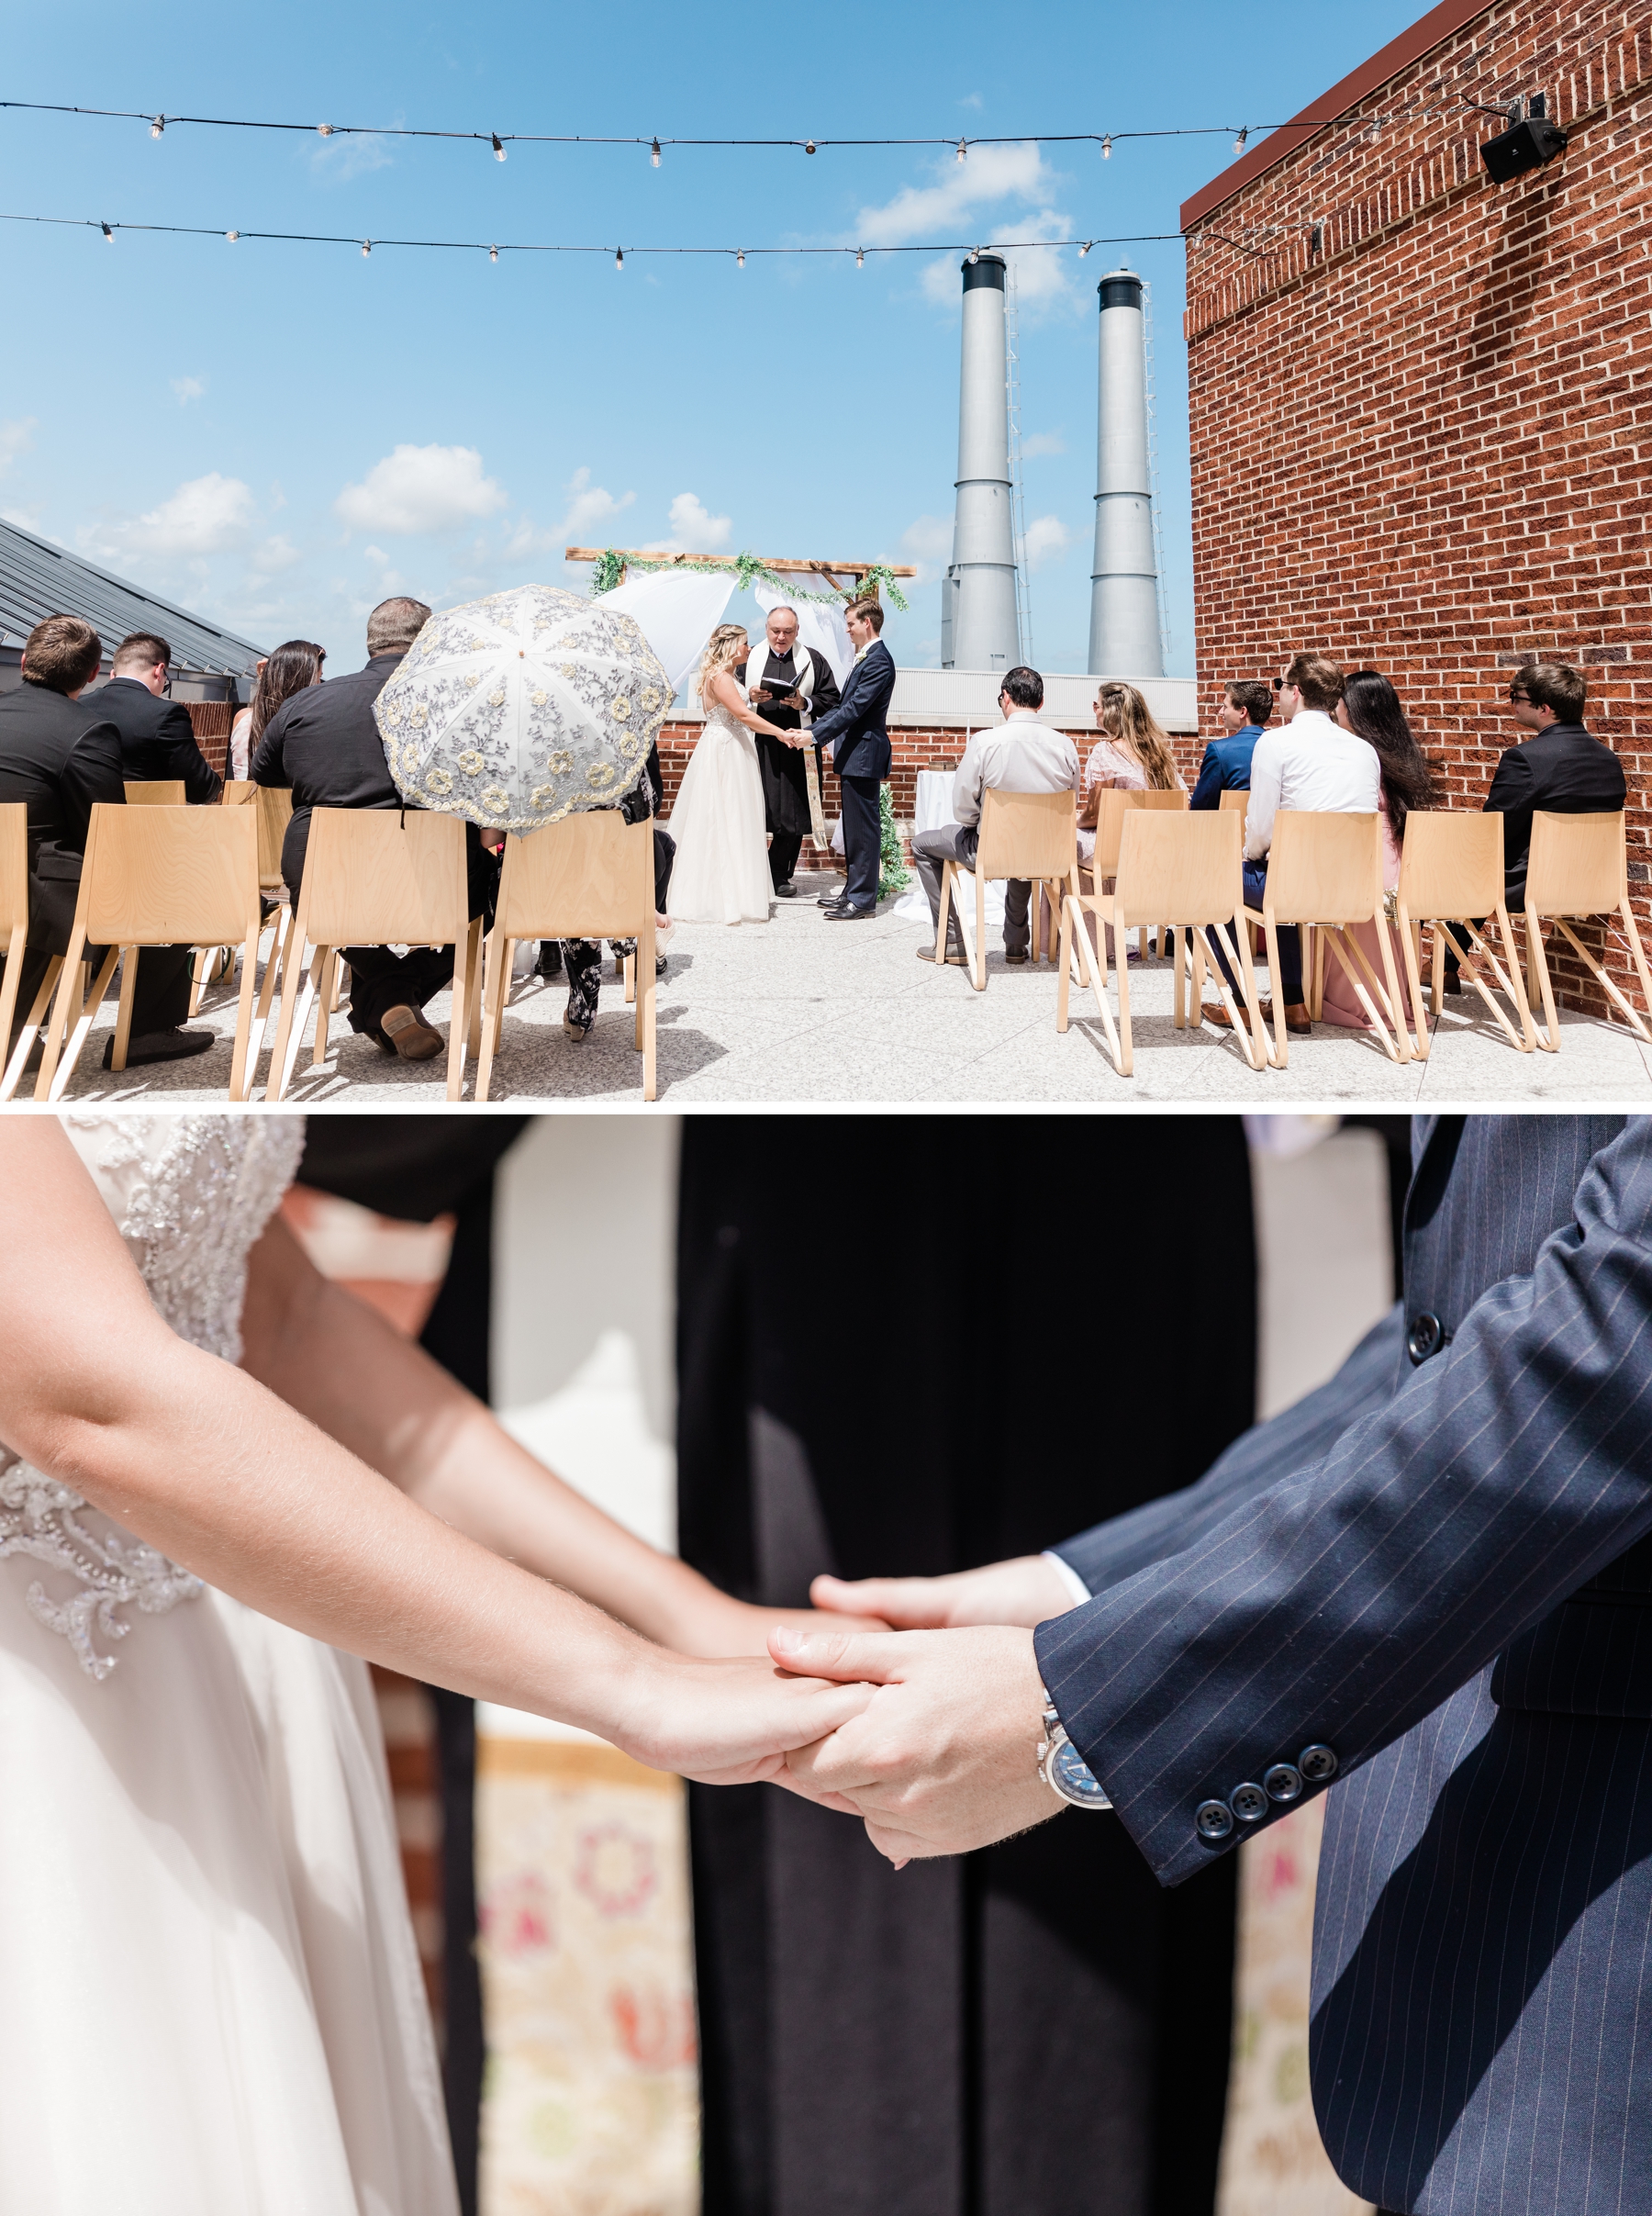  Rooftop Elopement at The Alida Hotel - Savannah Elopement Package